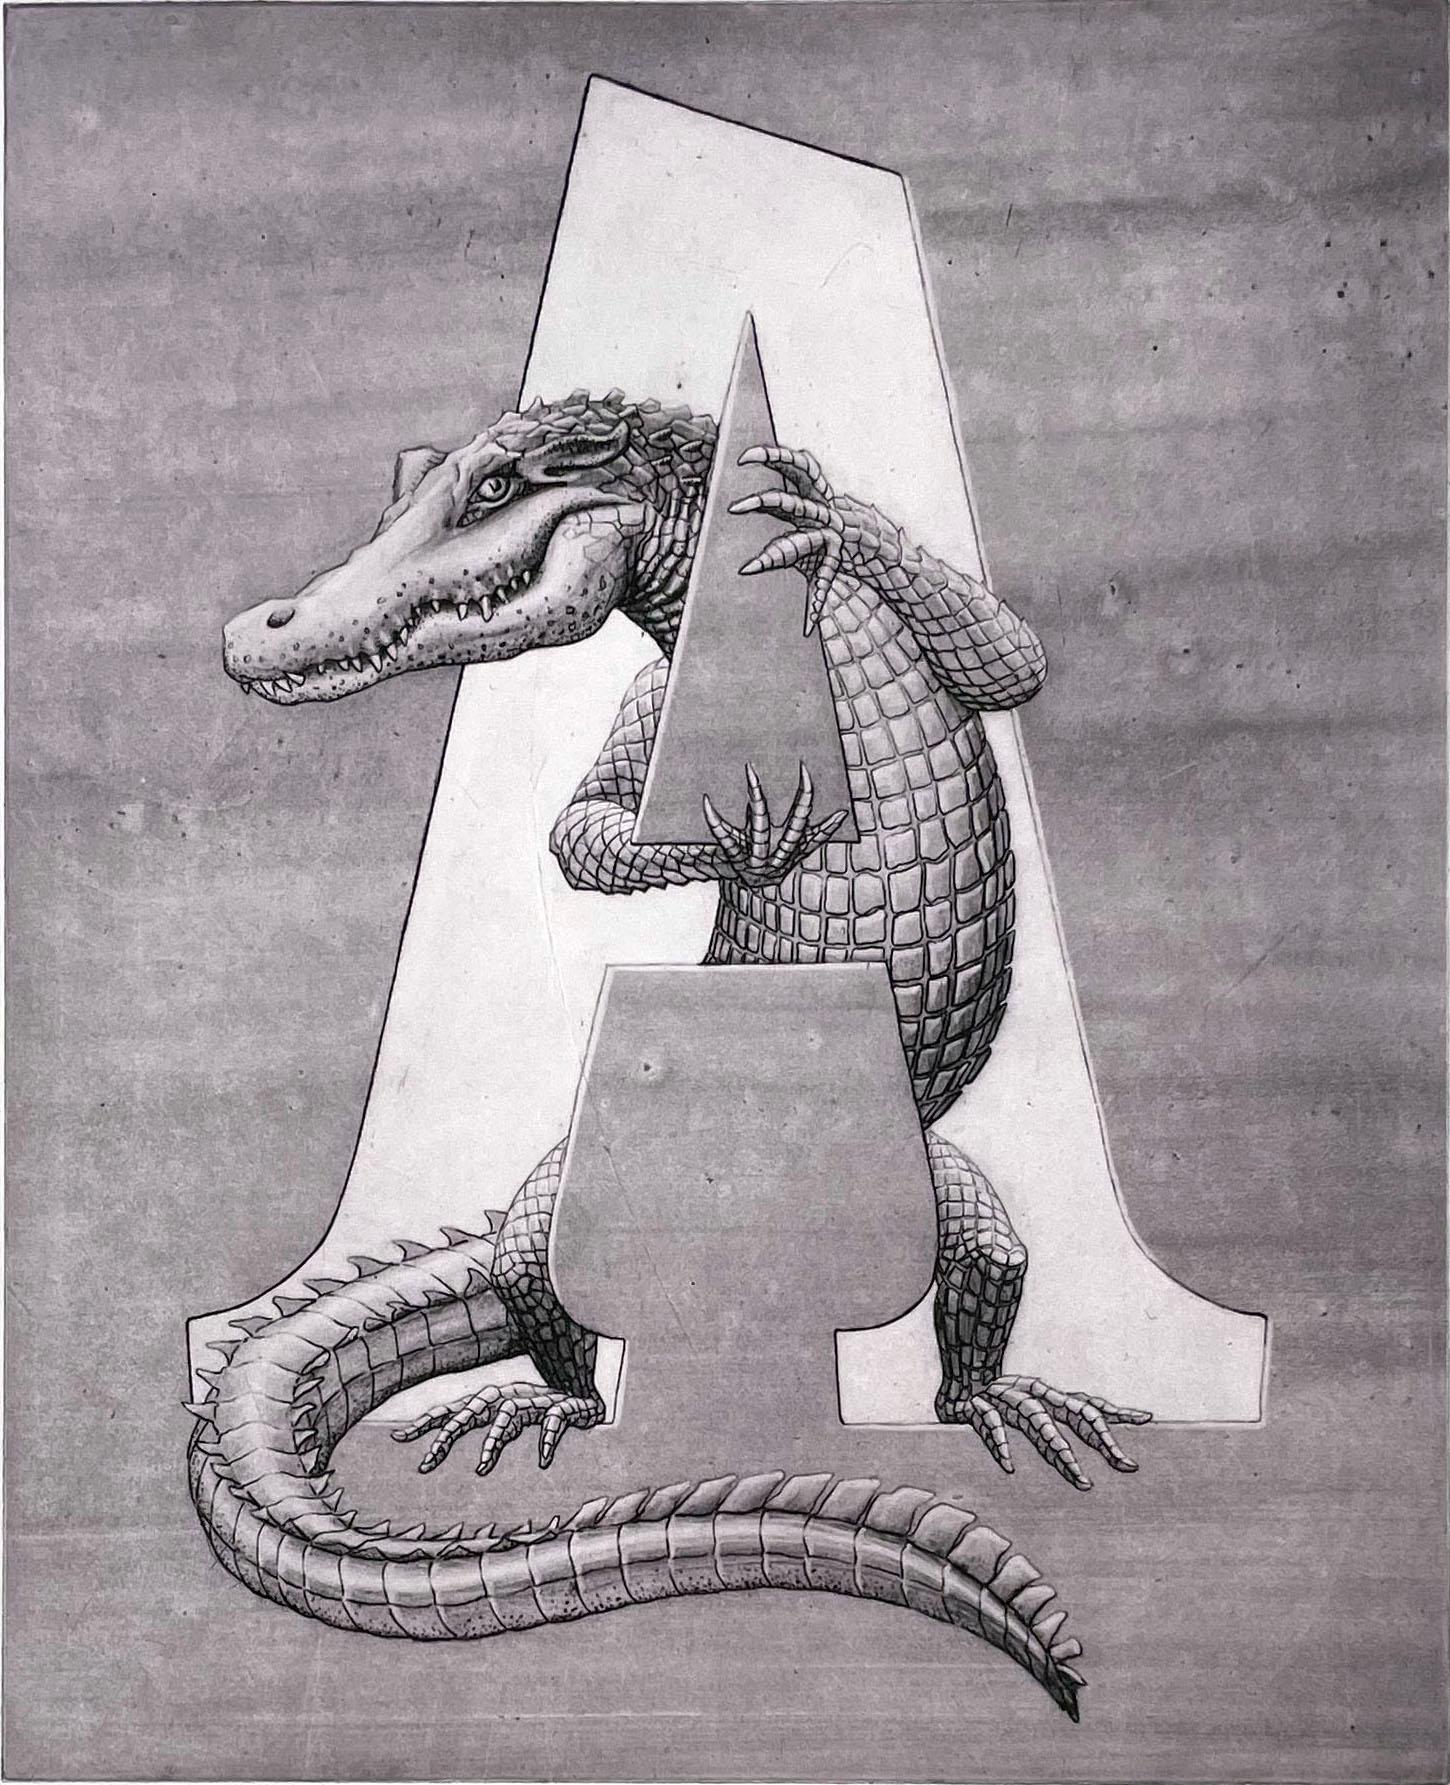 The single letter "A", from the alphabet, illustrated by an alligator. All letters are available, and the full set of 27 etchings in folio box is available for $3200. Animals, real and imagined, populate this imaginative set of prints. More images